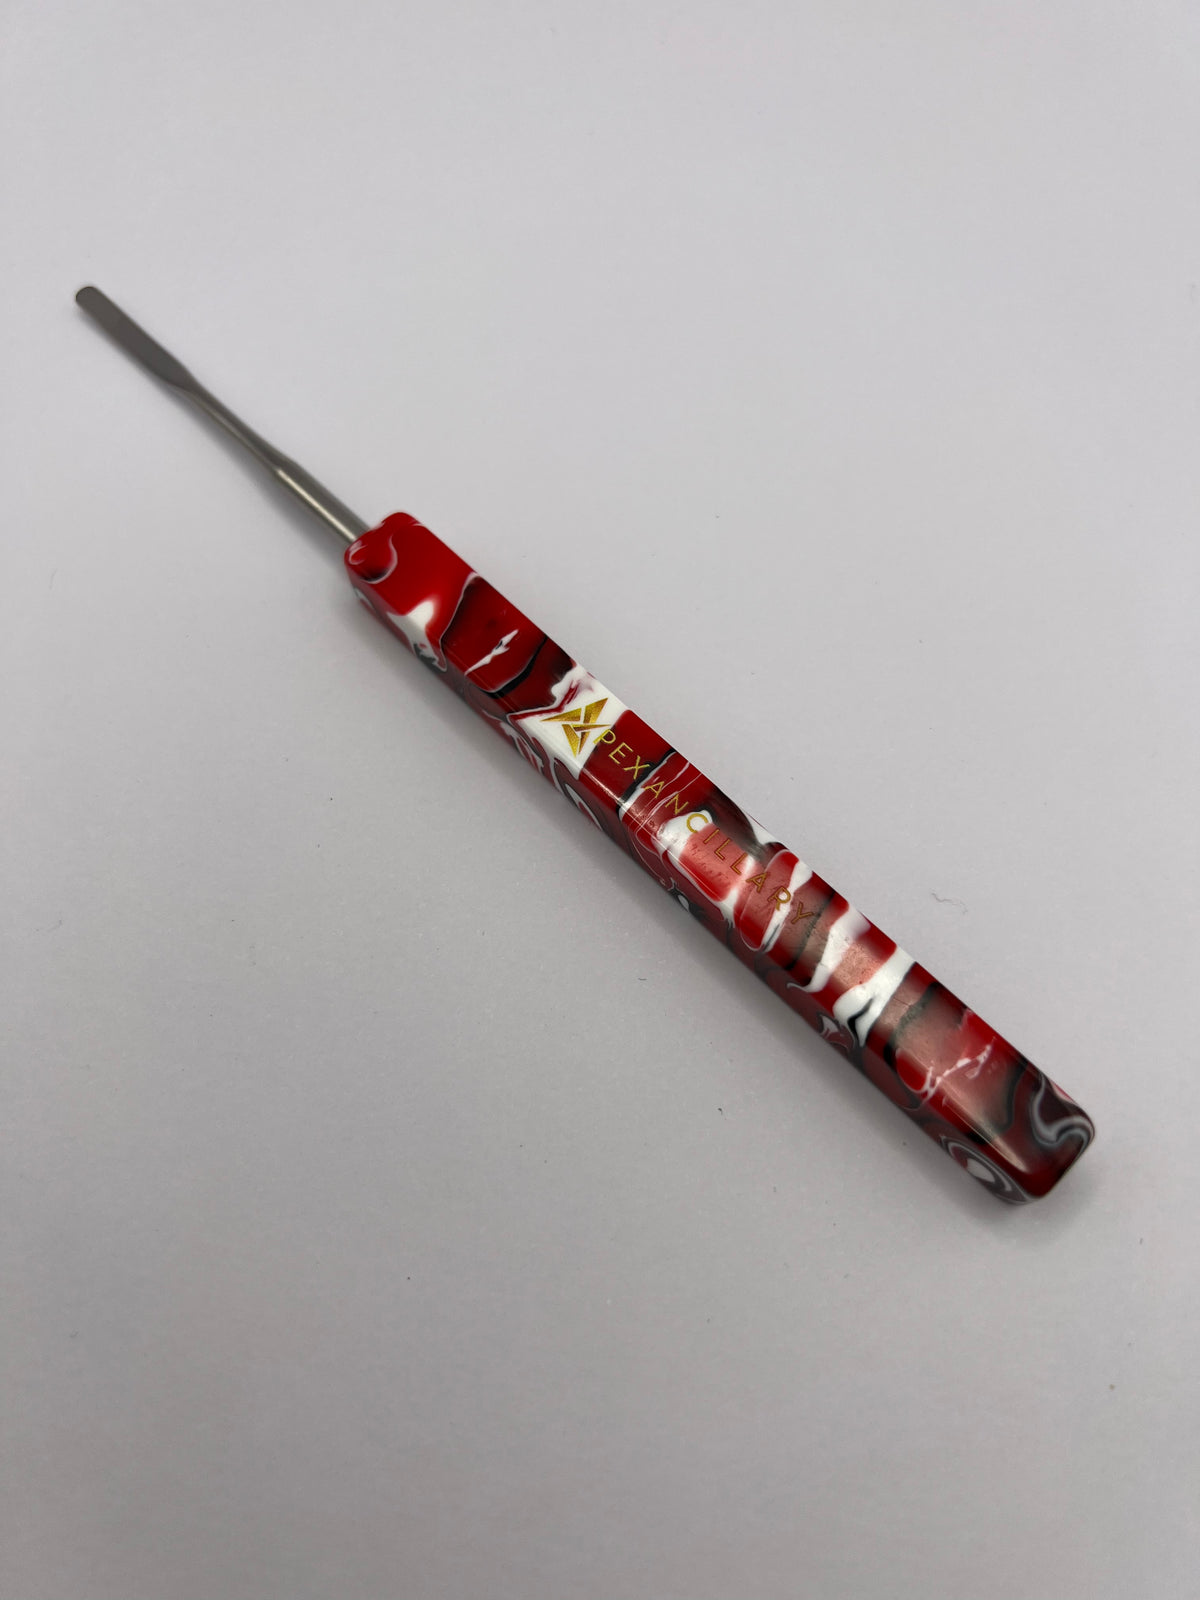 Apex Ancillary Epoxy Resin Handle Carving Tool | Stainless Steel Paddle Tip | Great for Whipping, Scooping, & More